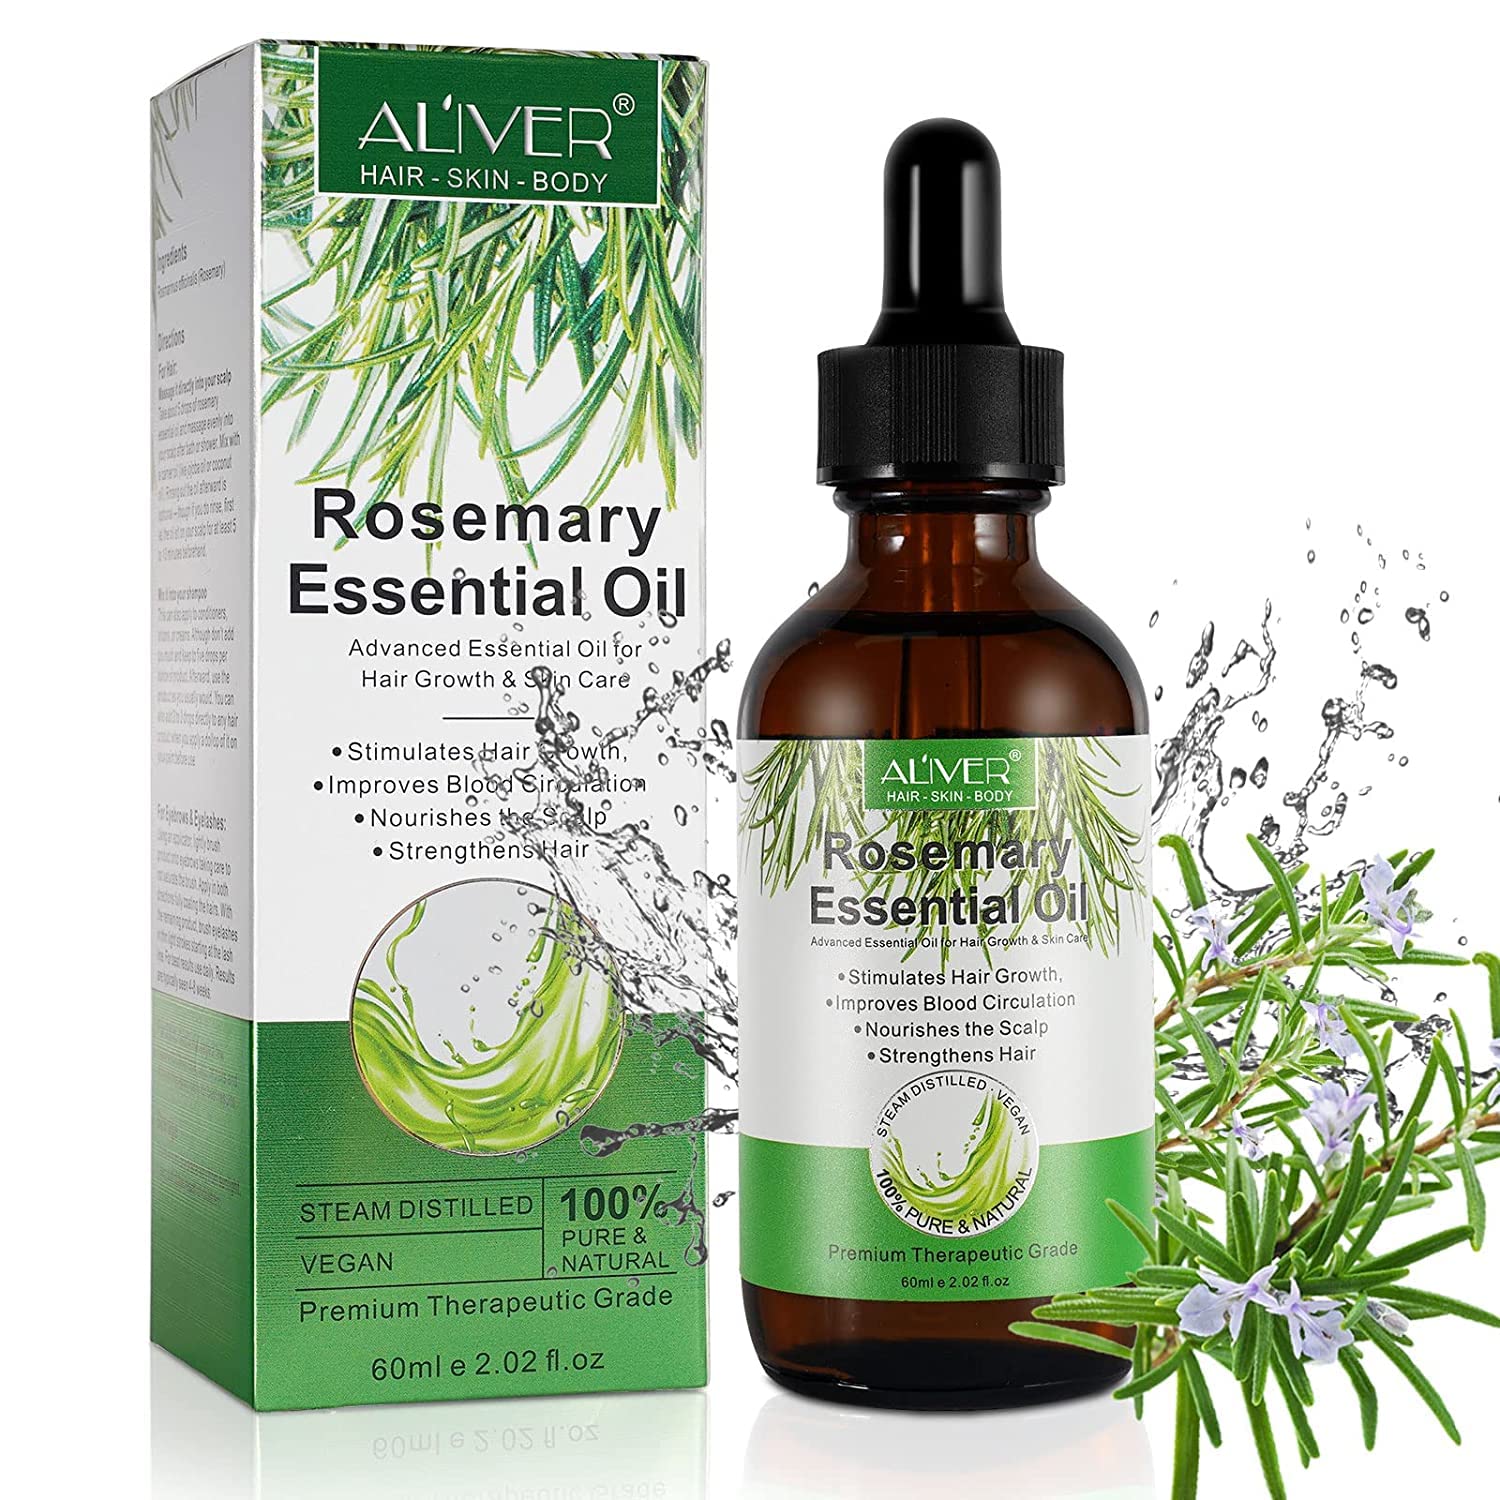 ALIVER Rosemary Essential Oil for Hair Growth